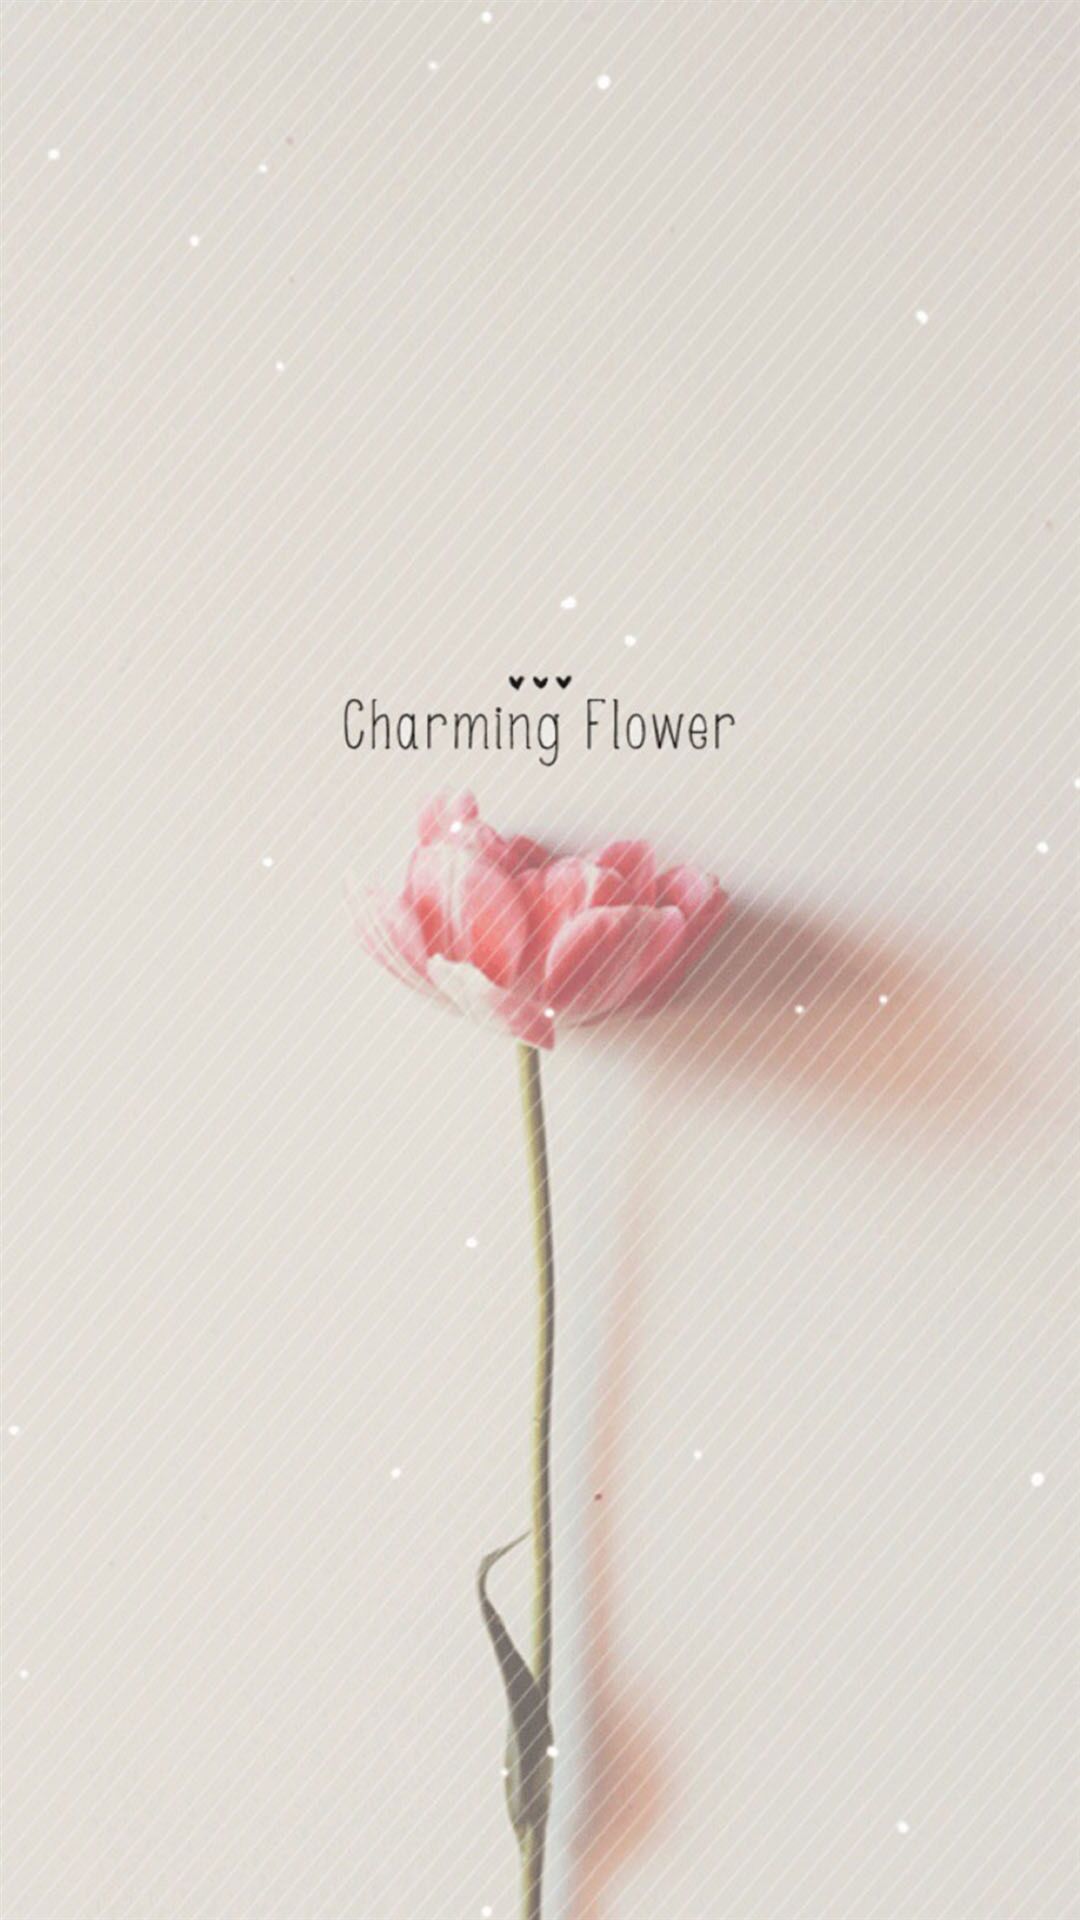 Pure Charming Flower Simple Pattern iPhone 6 Wallpaper Download. iPhone Wallpaper, iPad wallpape. Flower iphone wallpaper, Flower wallpaper, iPhone 5s wallpaper